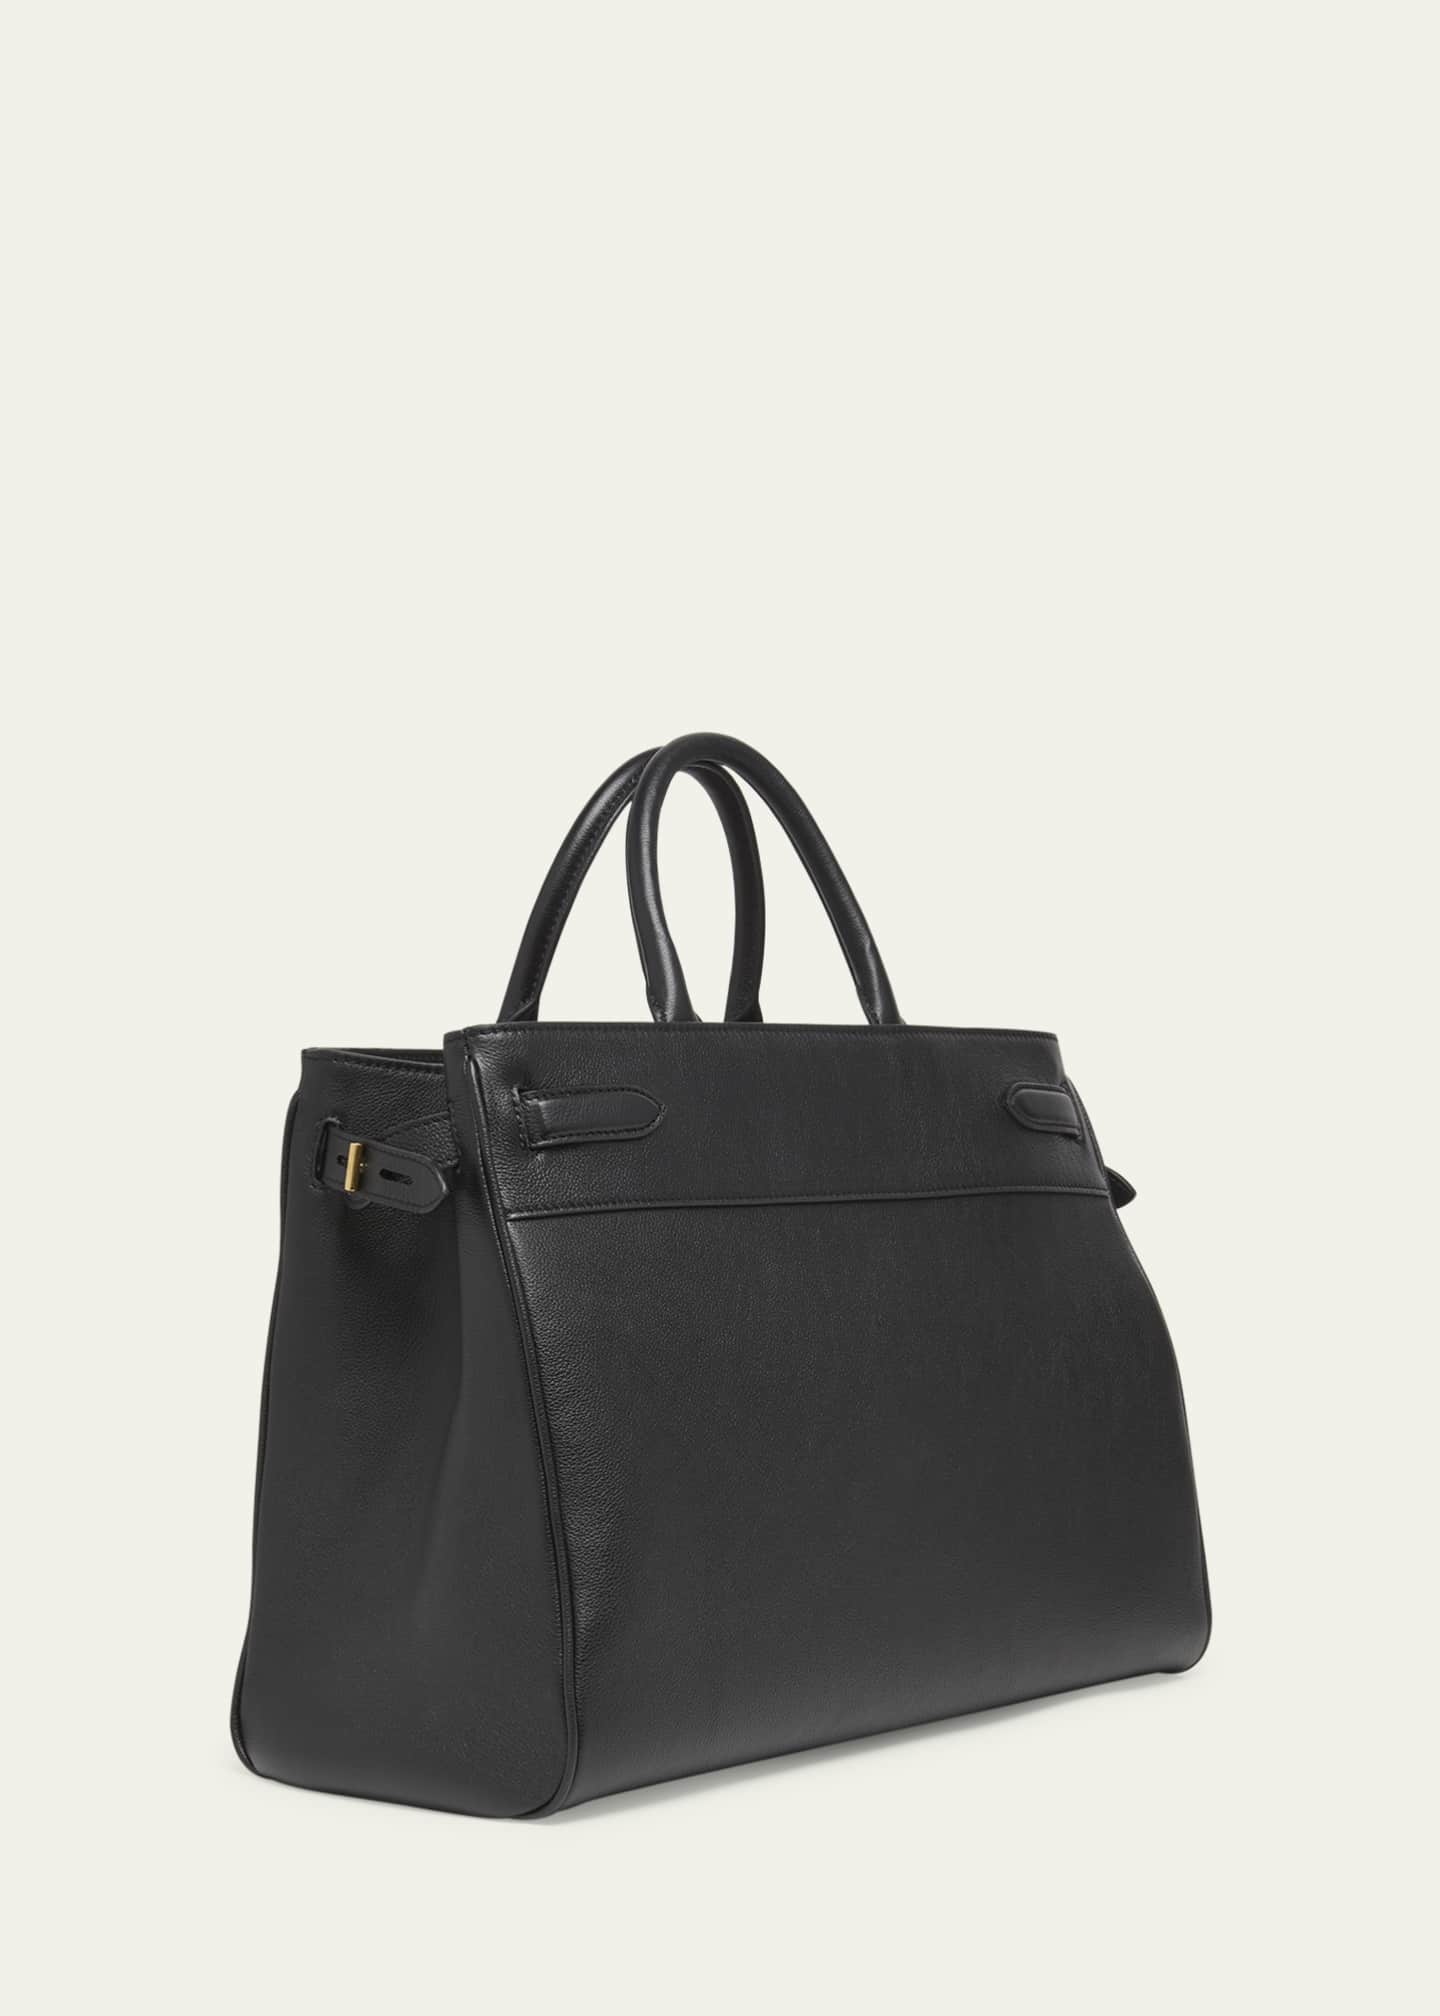 TOM FORD Whitney Large Top-Handle Bag in Leather